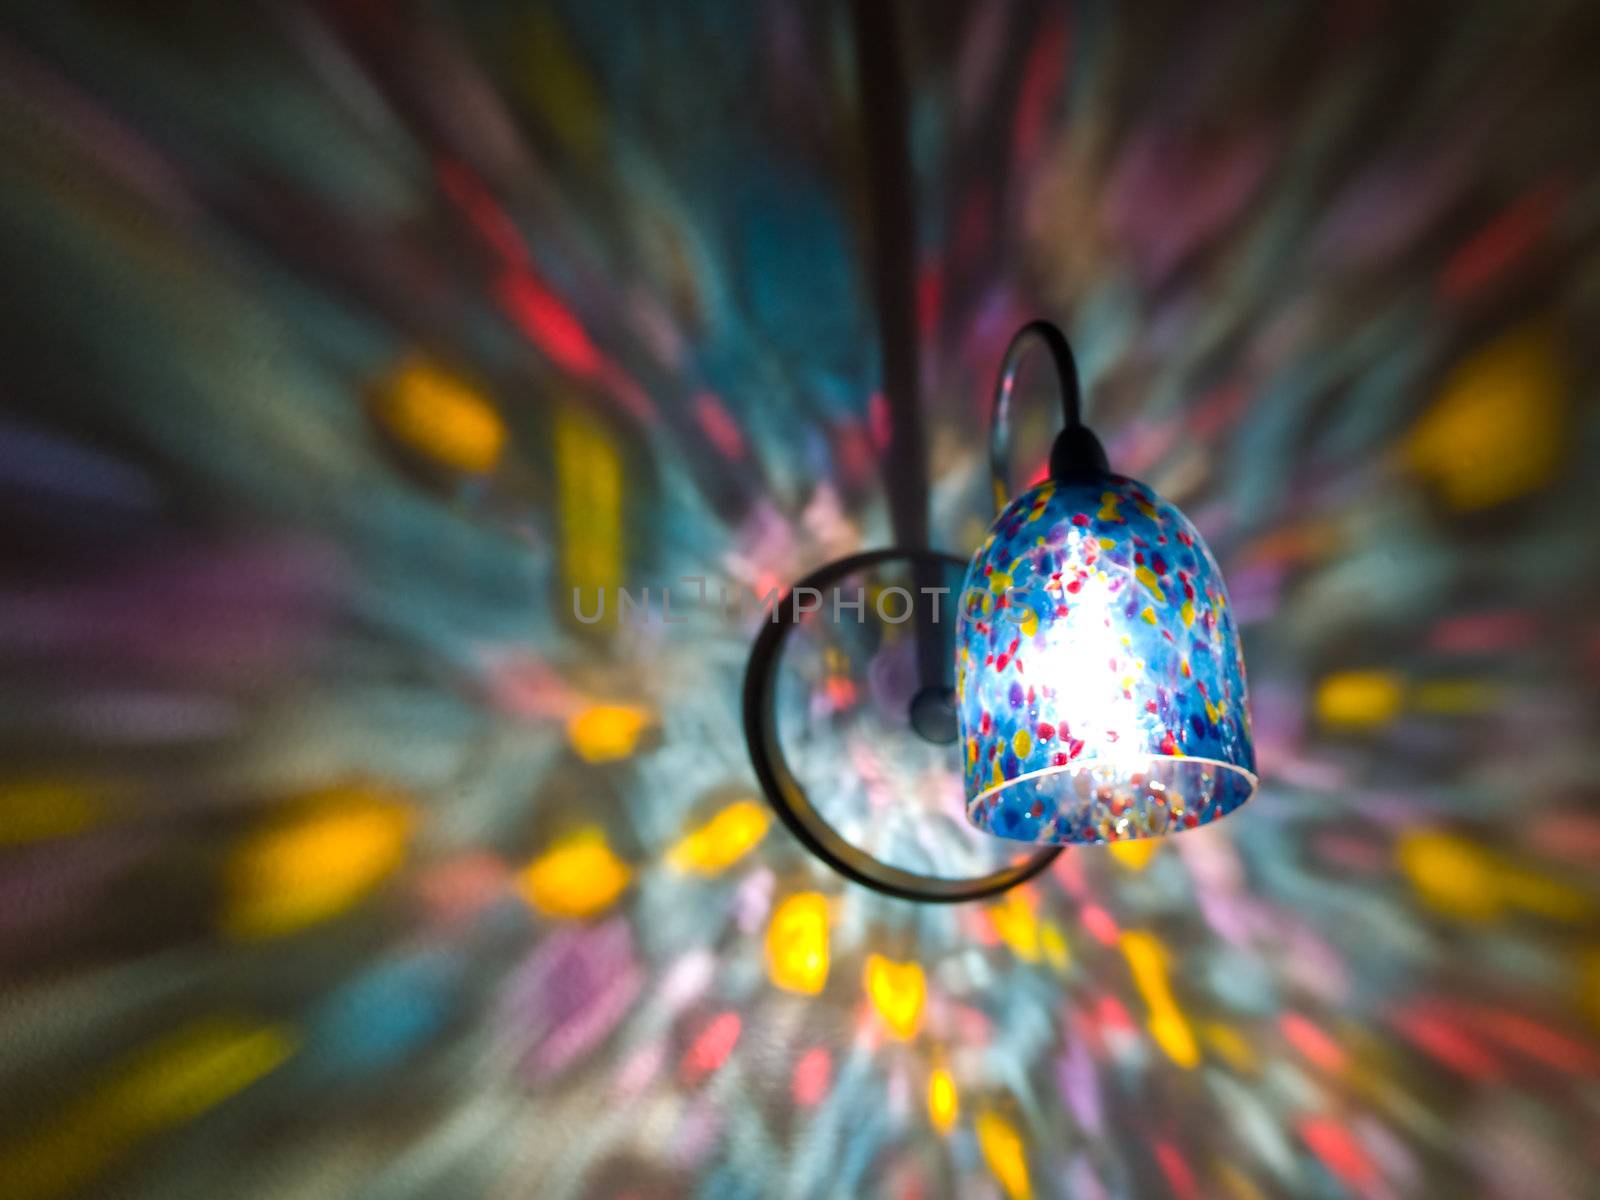 Lamp Lights in a Rainbow Sconce on a Wall by Frankljunior